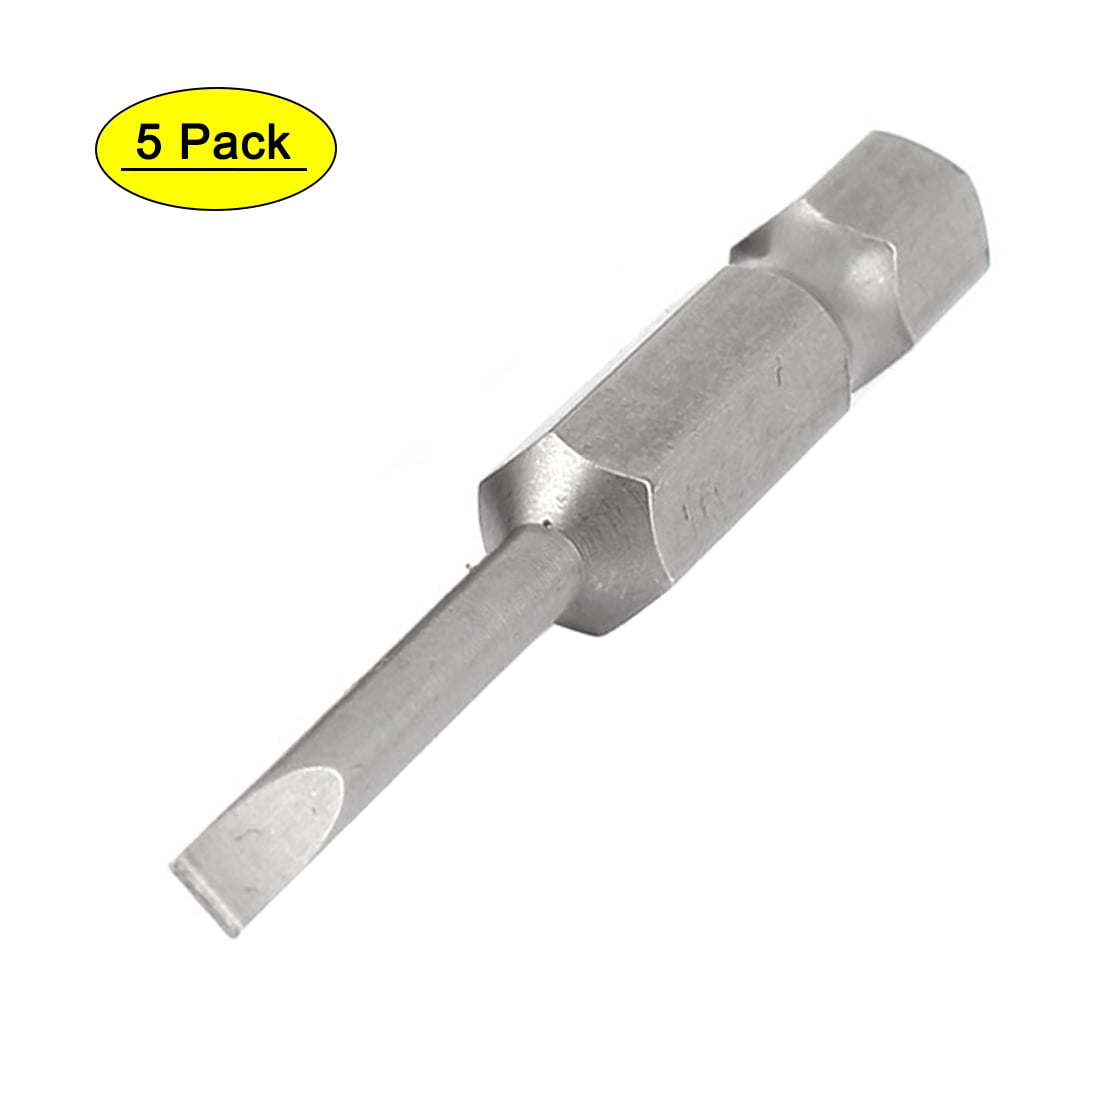 Set of 3 Slotted  1/4" Hex Screwdriver Bits 2" Length P/No 3200 